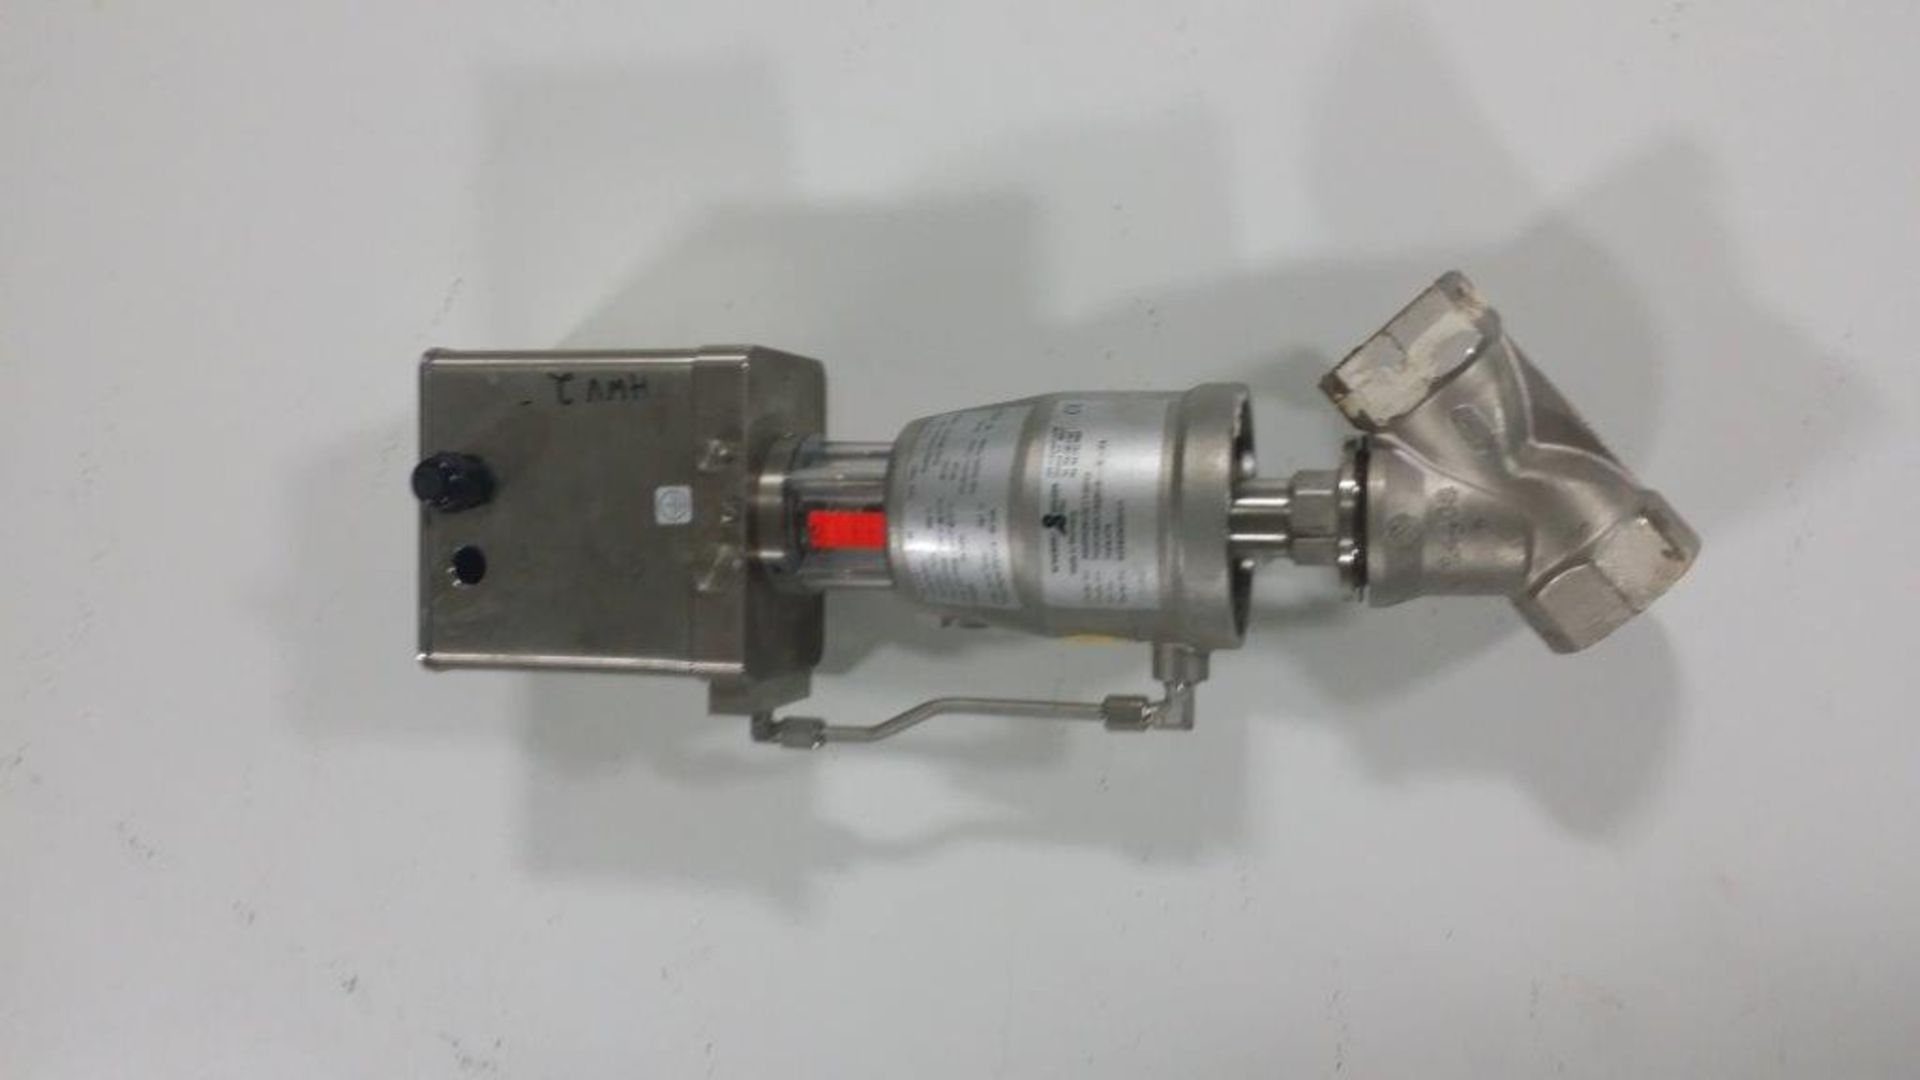 Schubert & Salzer Type 7020 Angle Seat Control Valve Size 1/4" to 3" Pressures up to 580 PSI,